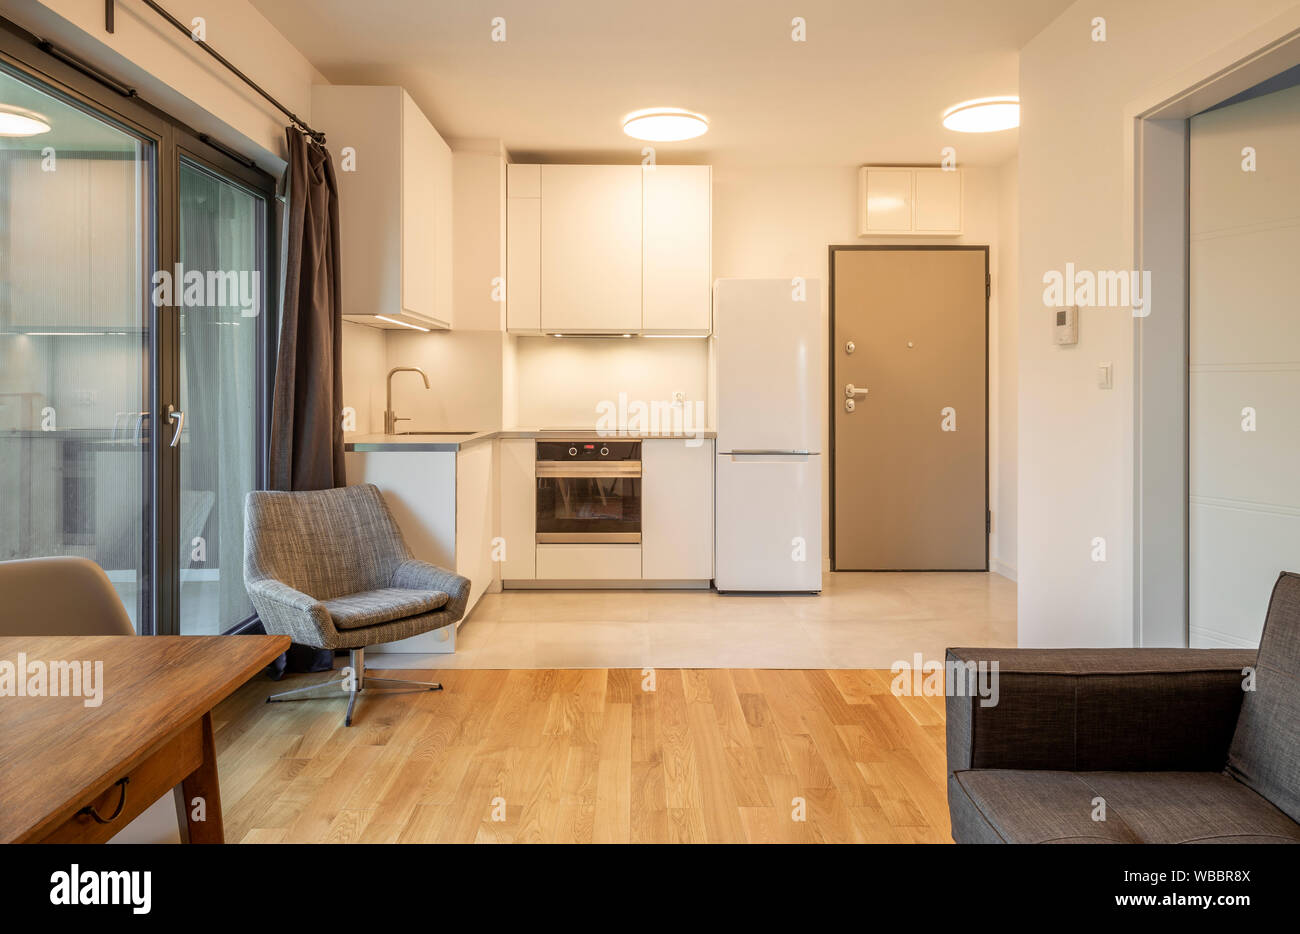 Interior of a modern micro apartment with living room and kitchenette Stock Photo